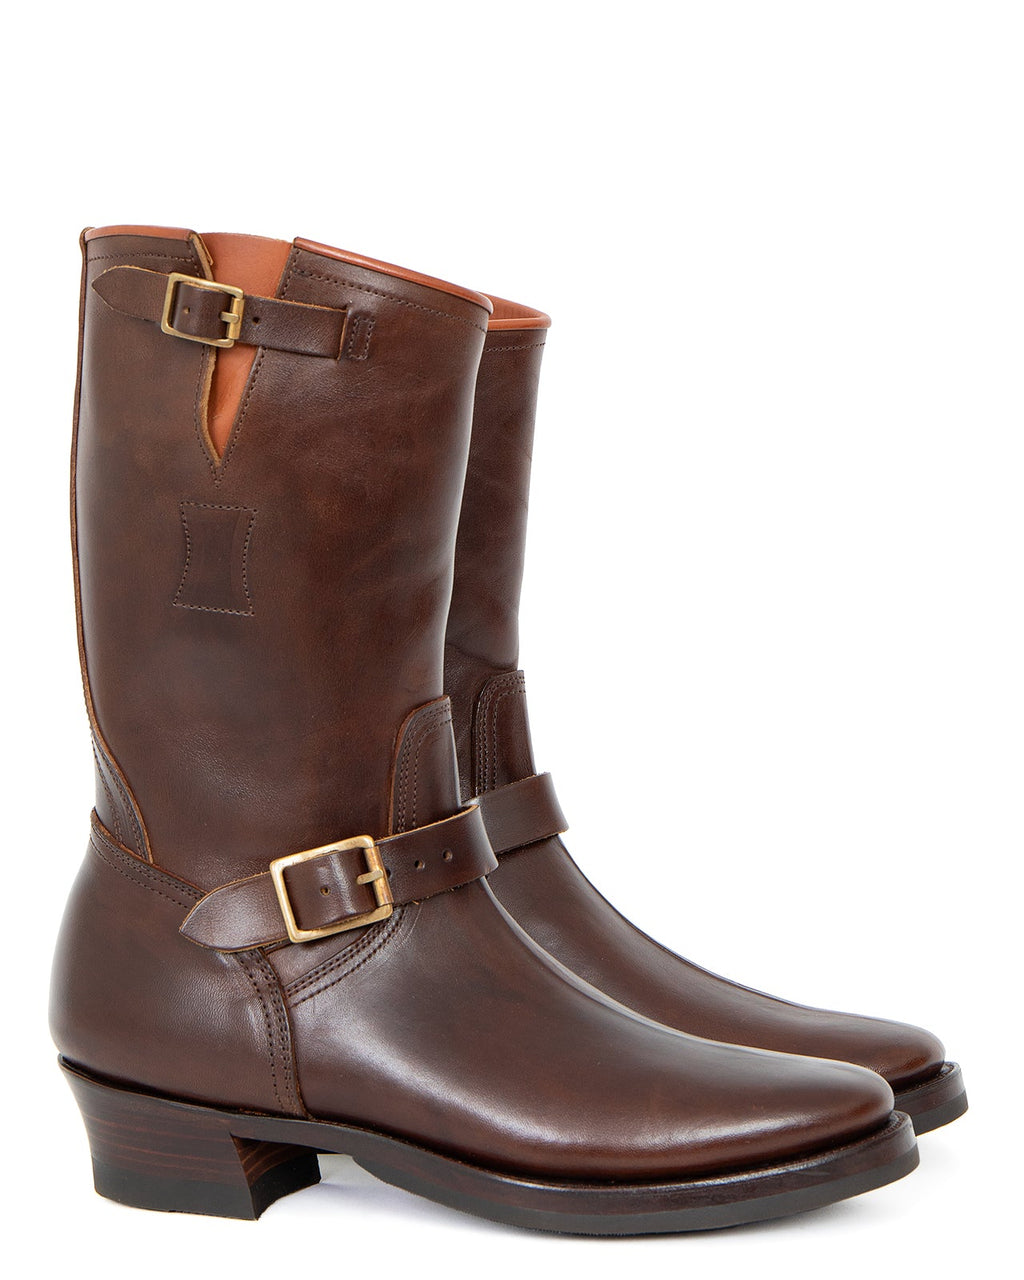 Clinch Boots / Brass Tokyo – Pancho And Lefty - Online Store